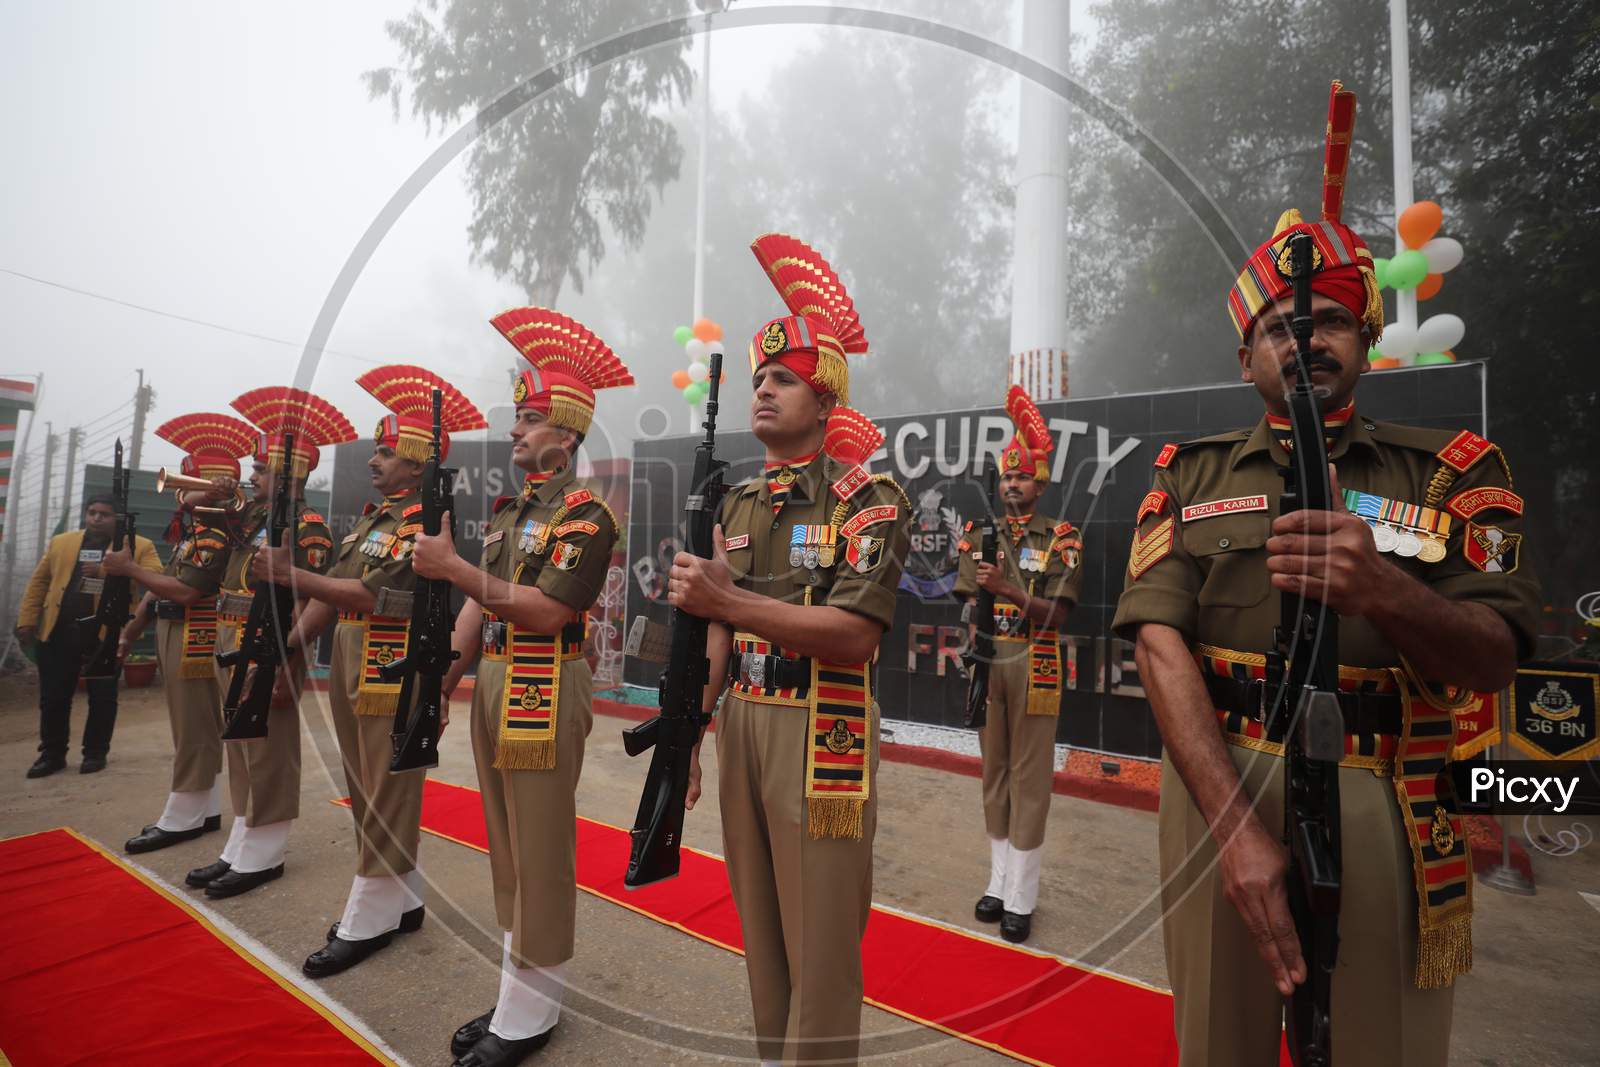 BSF soldiers salutes after hoisting the National Flag on the occasion of 72nd Republic Day celebrations at octroi post in Suchatgarh International border in Jammu ,26 Jan,2021.